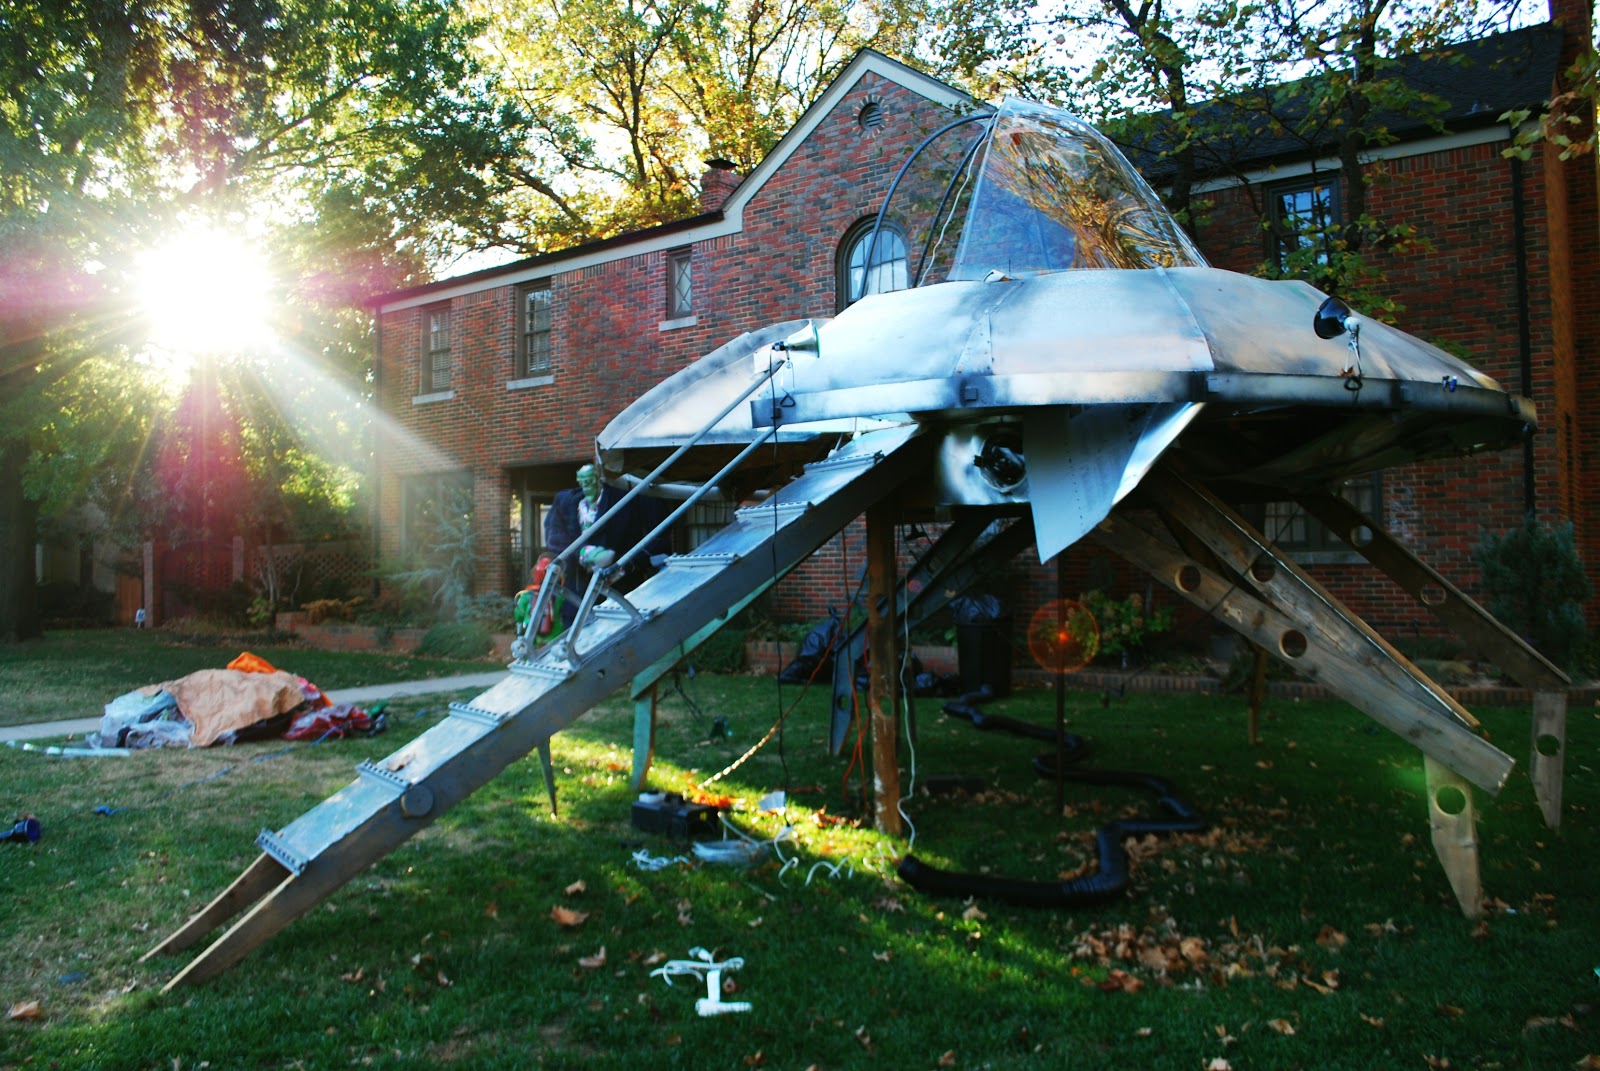 This dad gets the prize for coolest Halloween decorations ever: Homemade Alien Spaceship